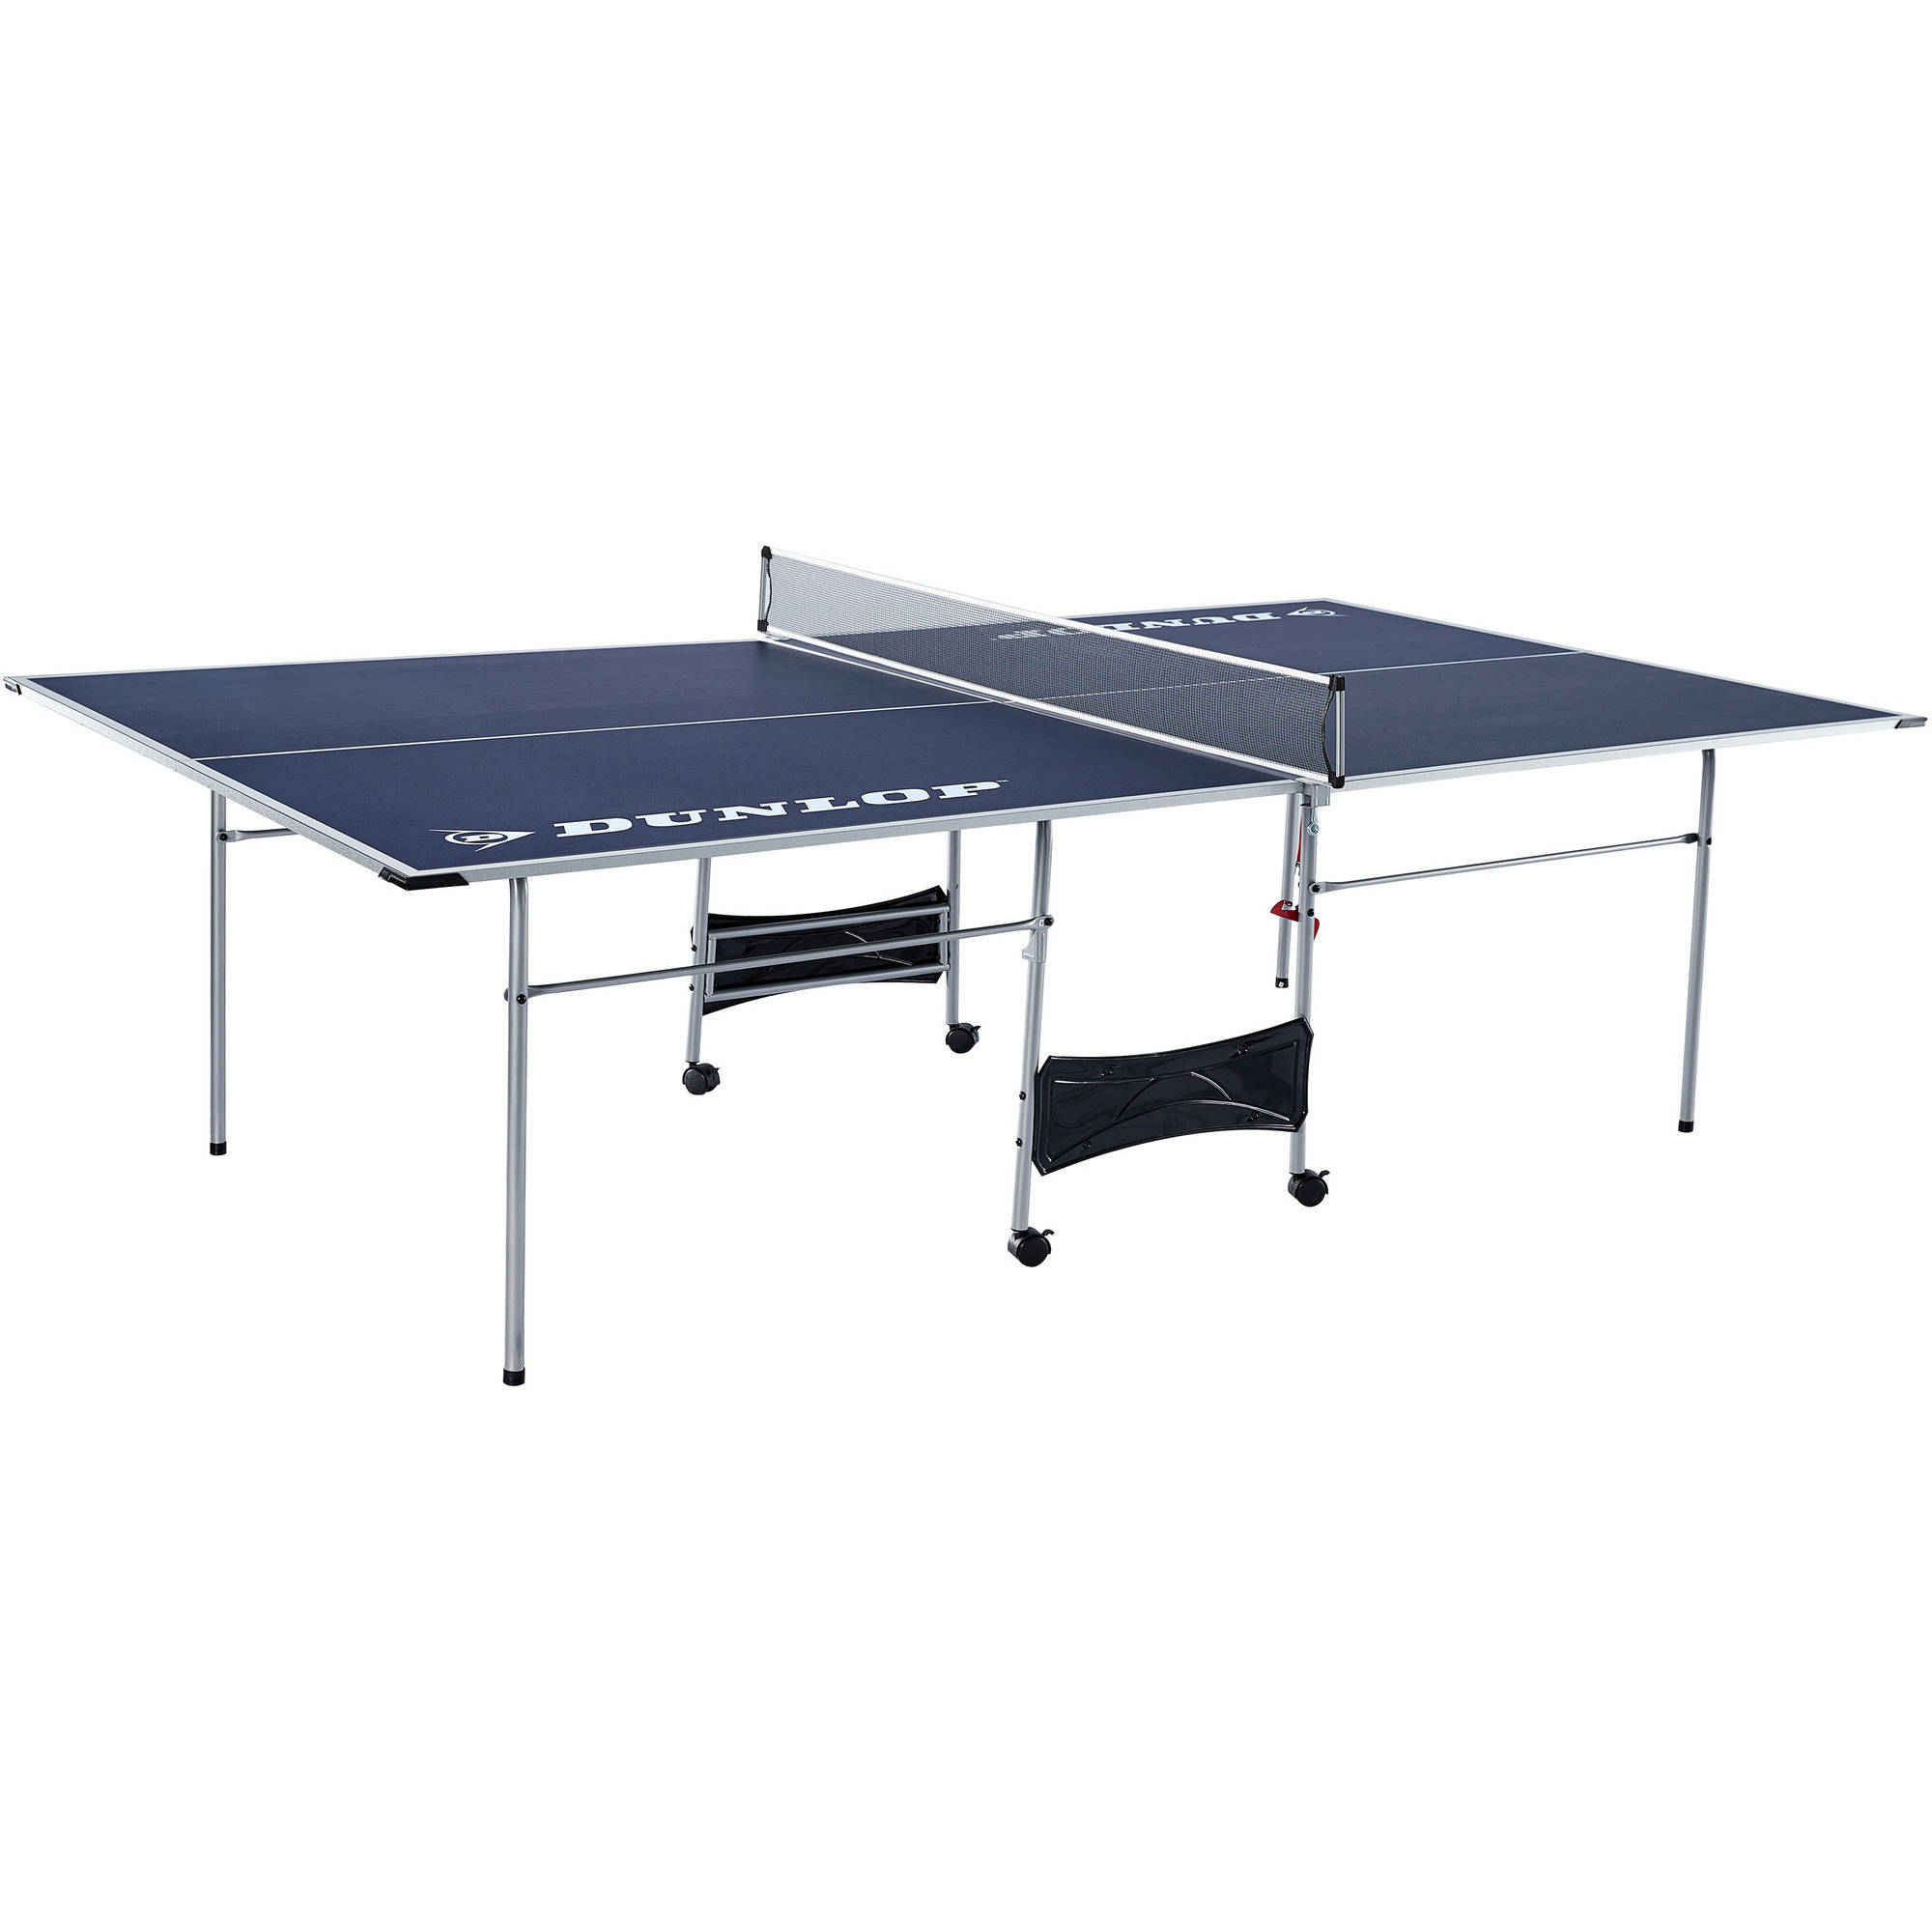 Dunlop official size table tennis table for $79